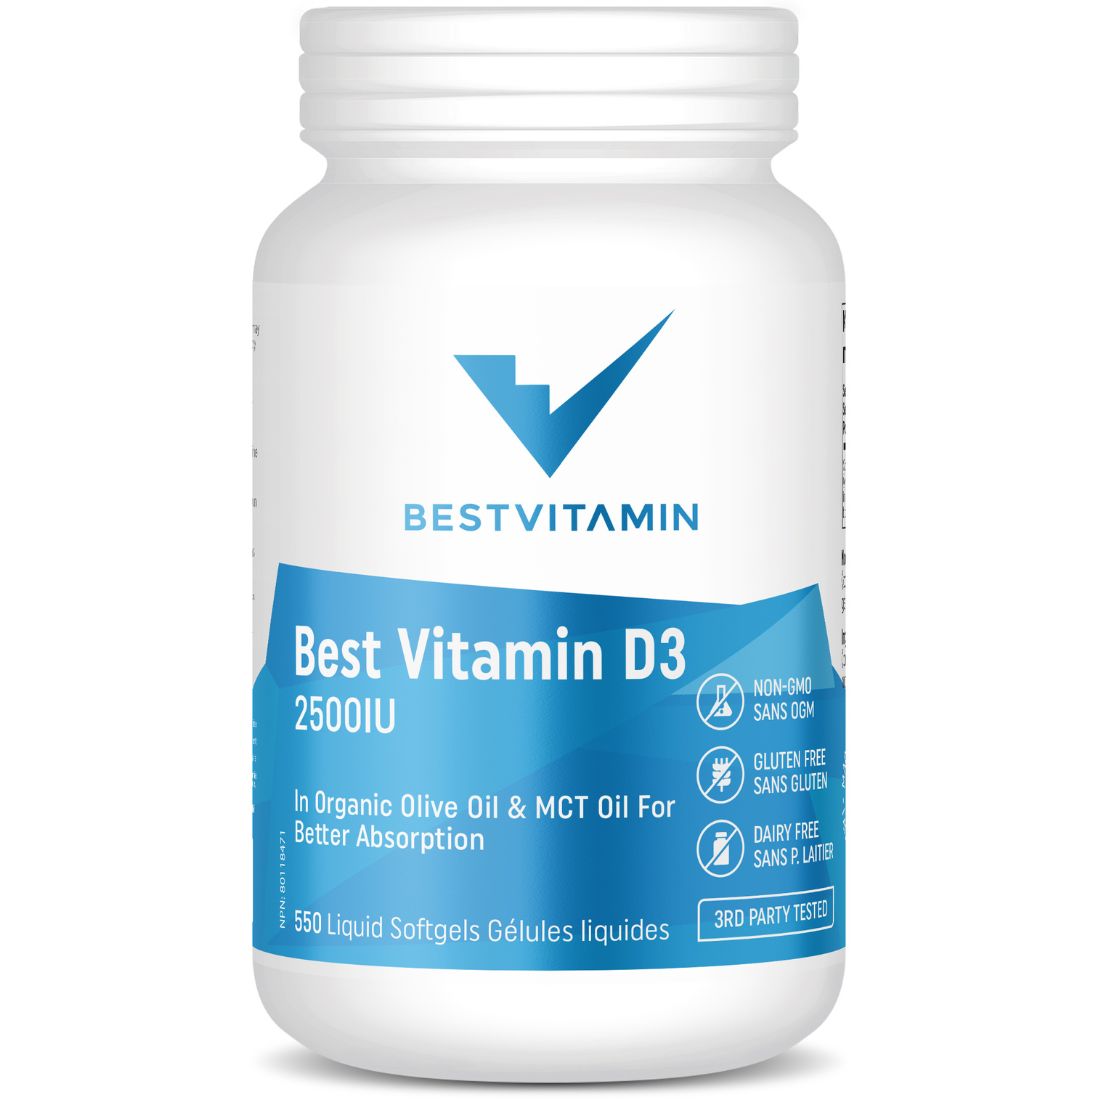 BestVitamin Best Vitamin D3 2500IU Extra Strength Softgels  (In Organic Olive Oil & MCT Oil For Better Absorption)